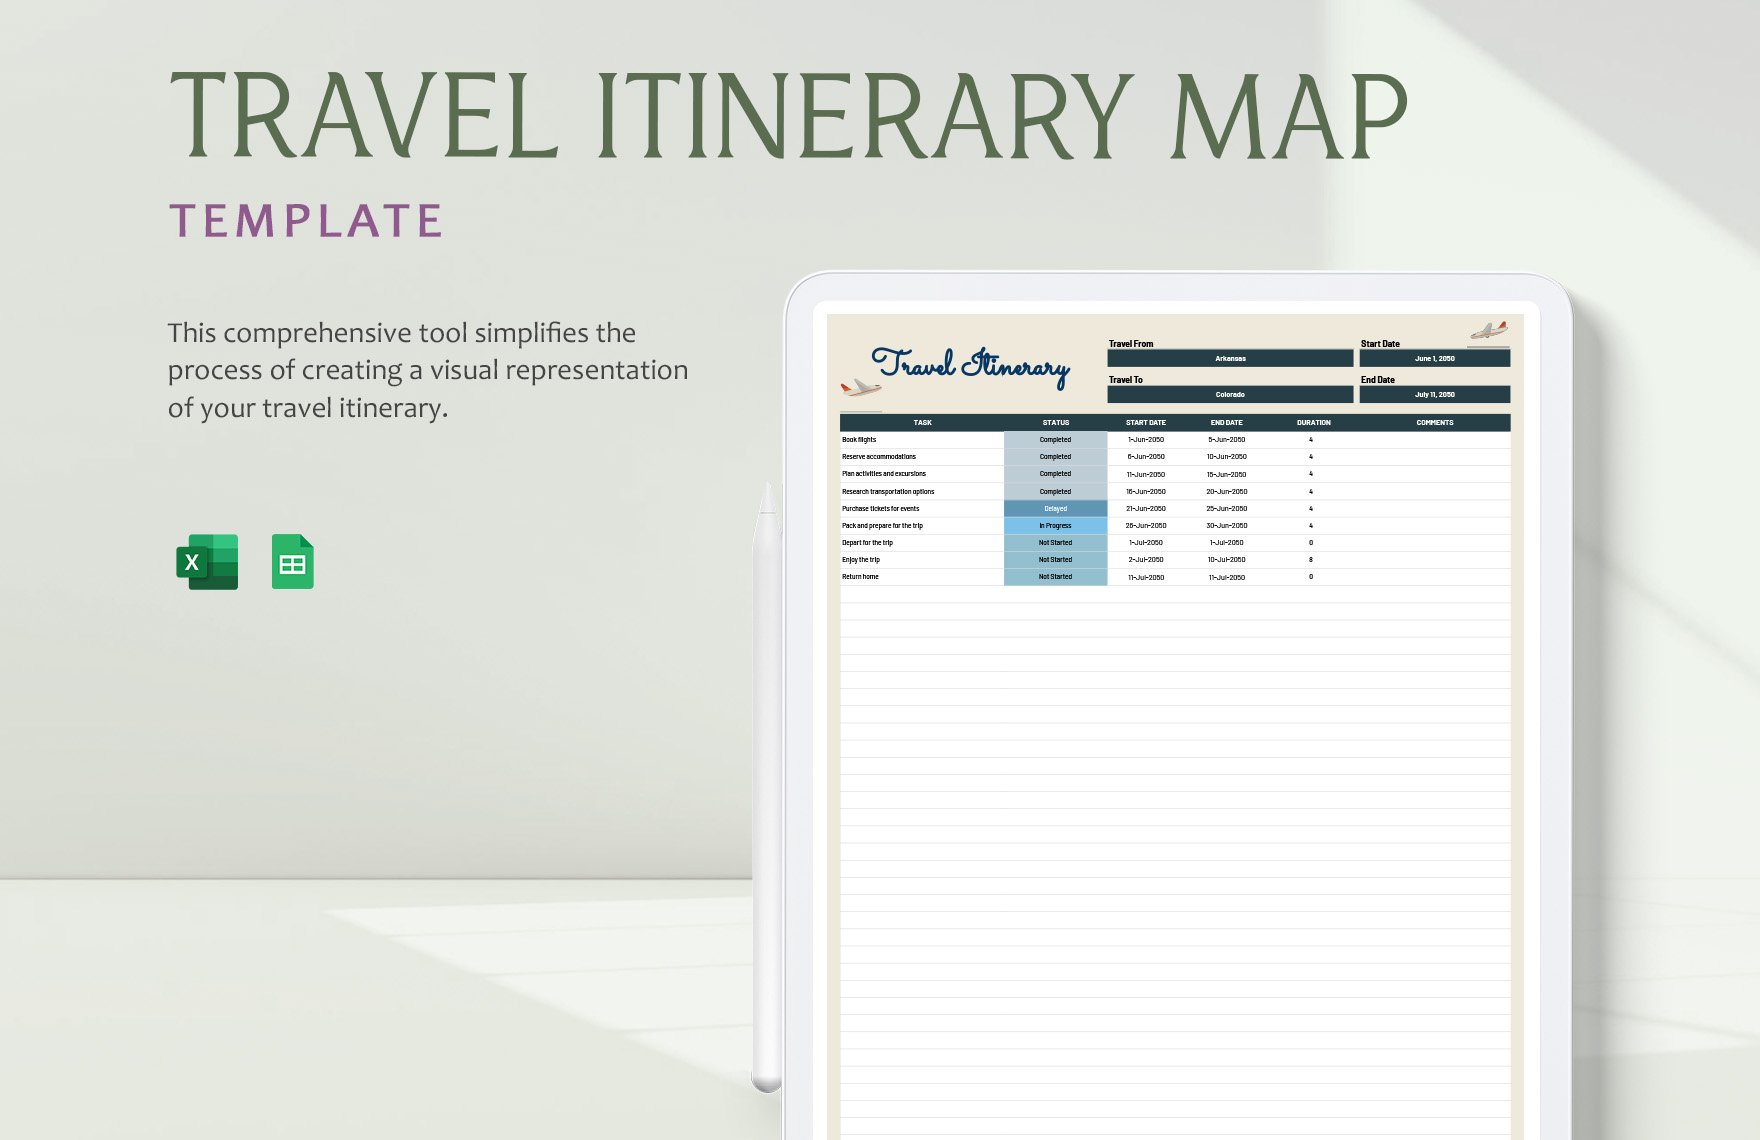 Travel Itinerary Map Template